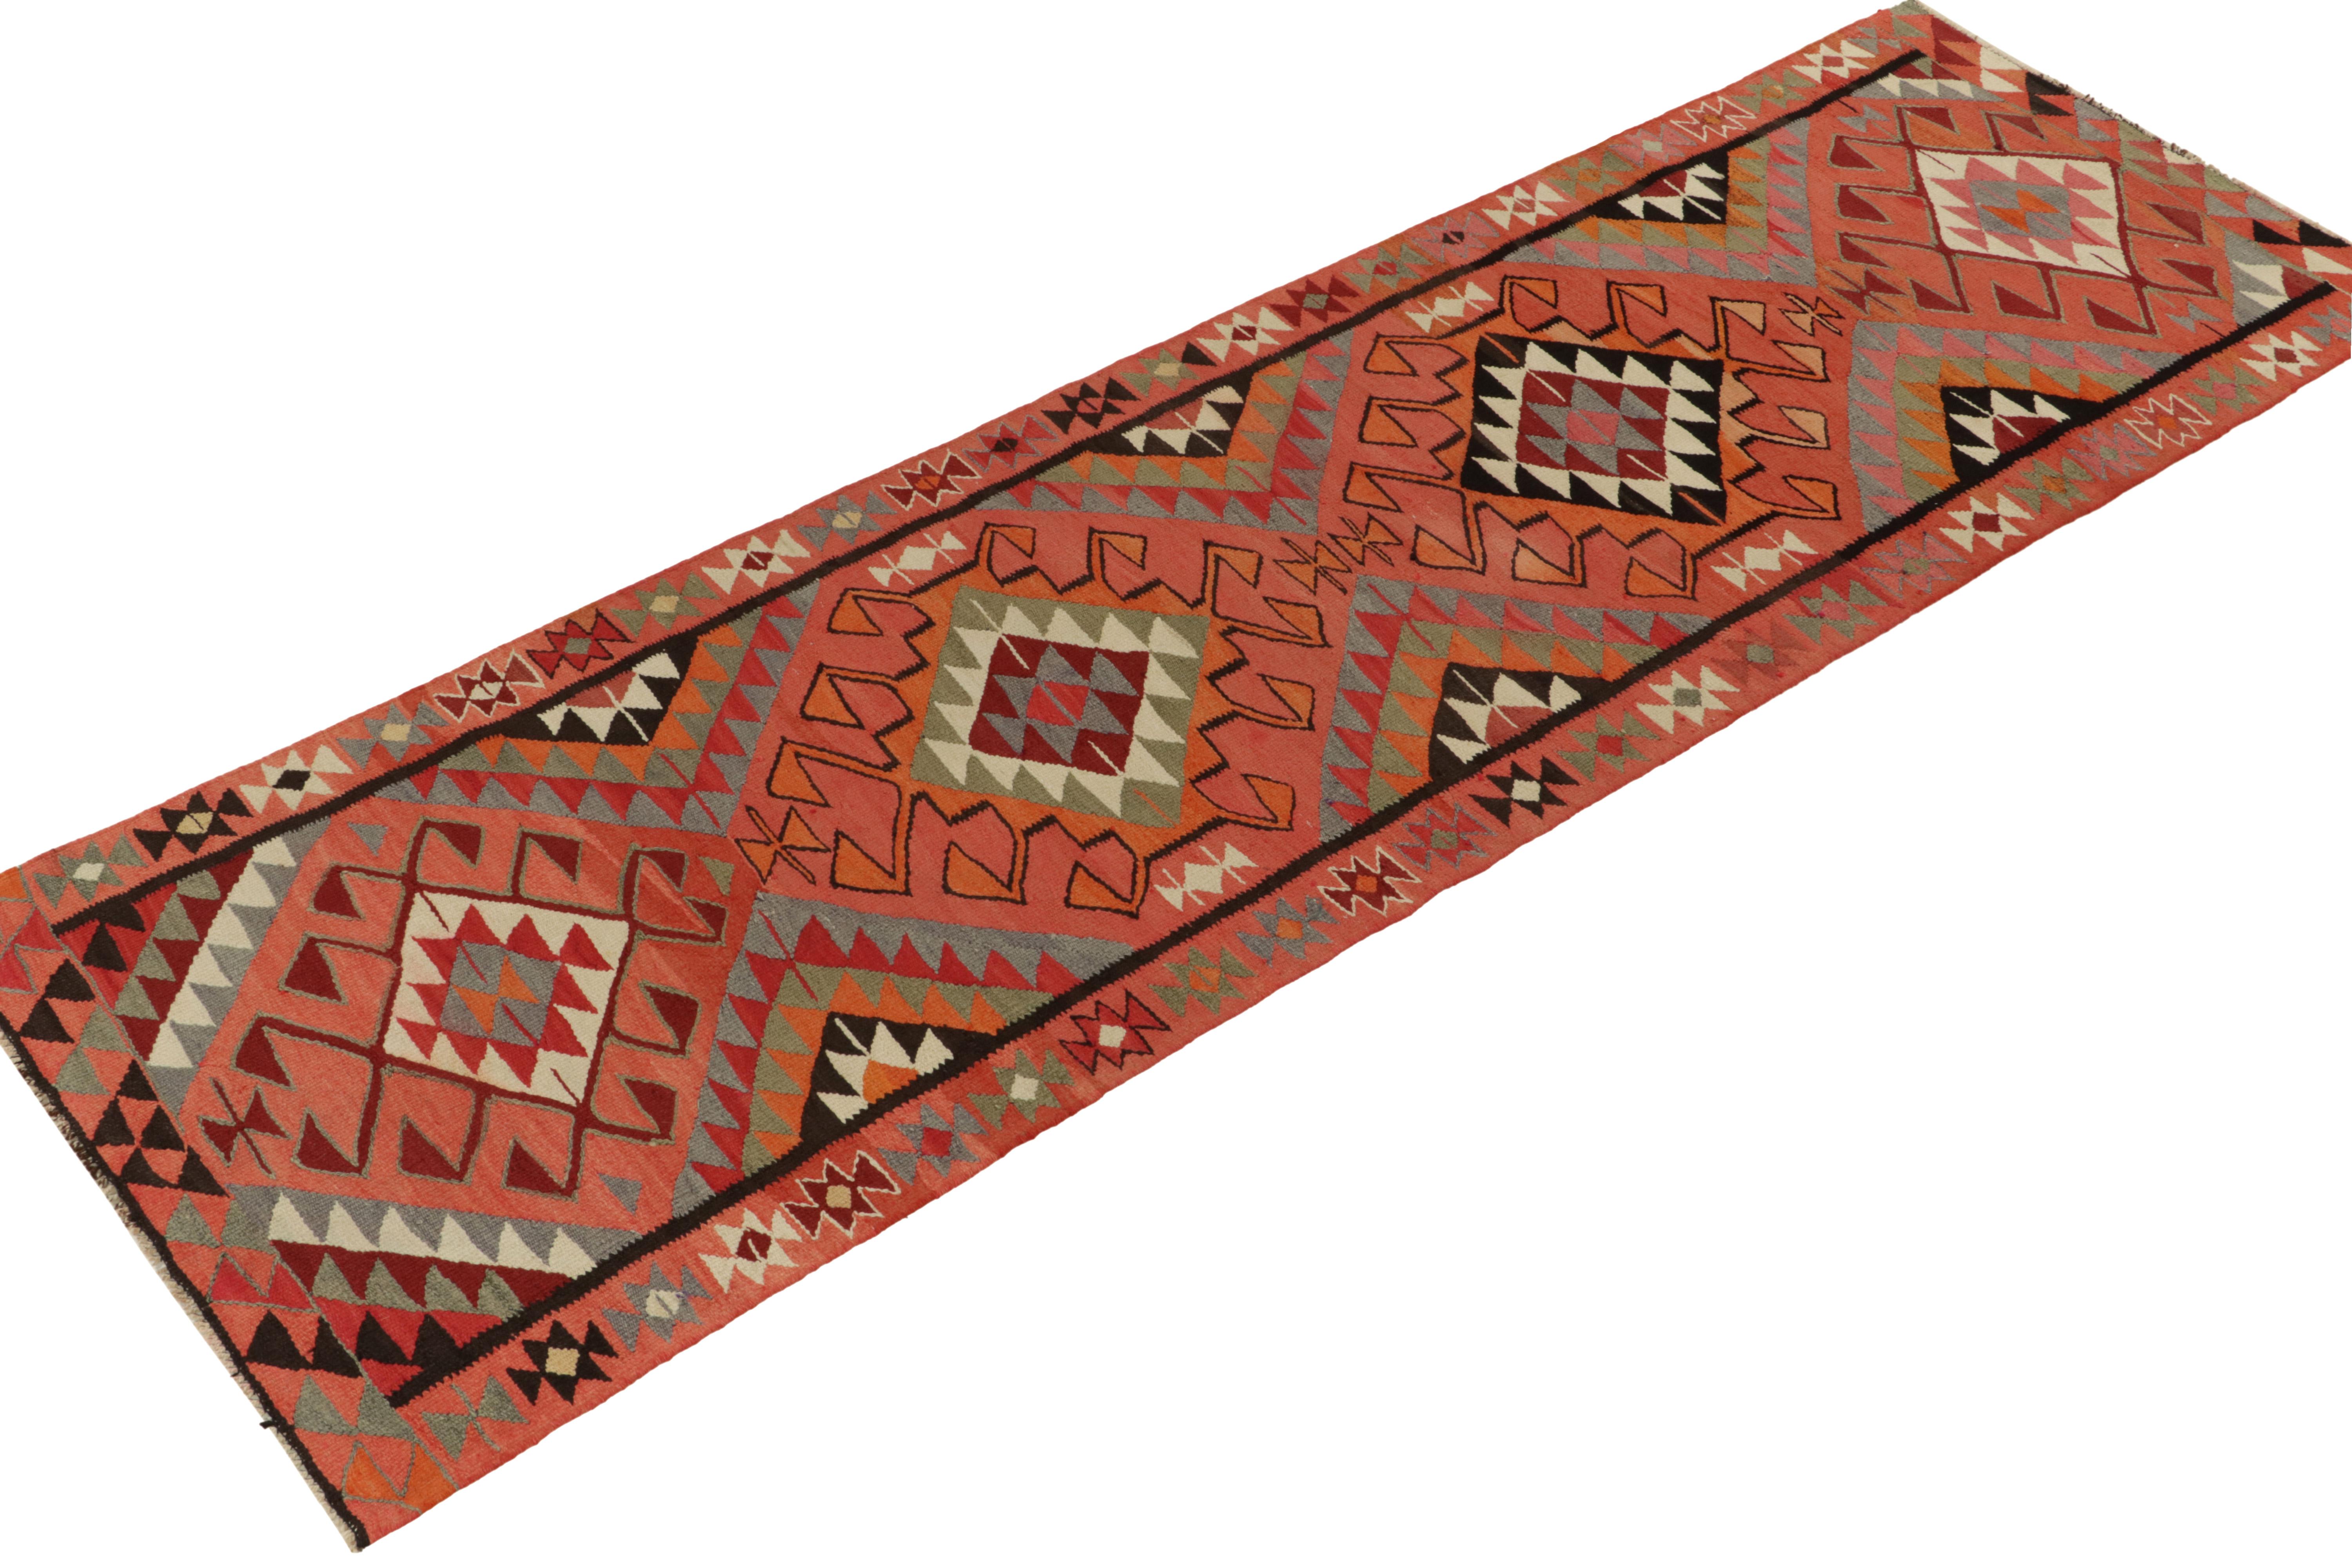 From R&K Principal Josh Nazmiyal’s latest acquisitions, a distinct 3x11 vintage kilim runner originating from Turkey circa 1950-1960. 

On the Design: This particular tribal rug enjoys a brilliant sense of life and movement in the vibrant